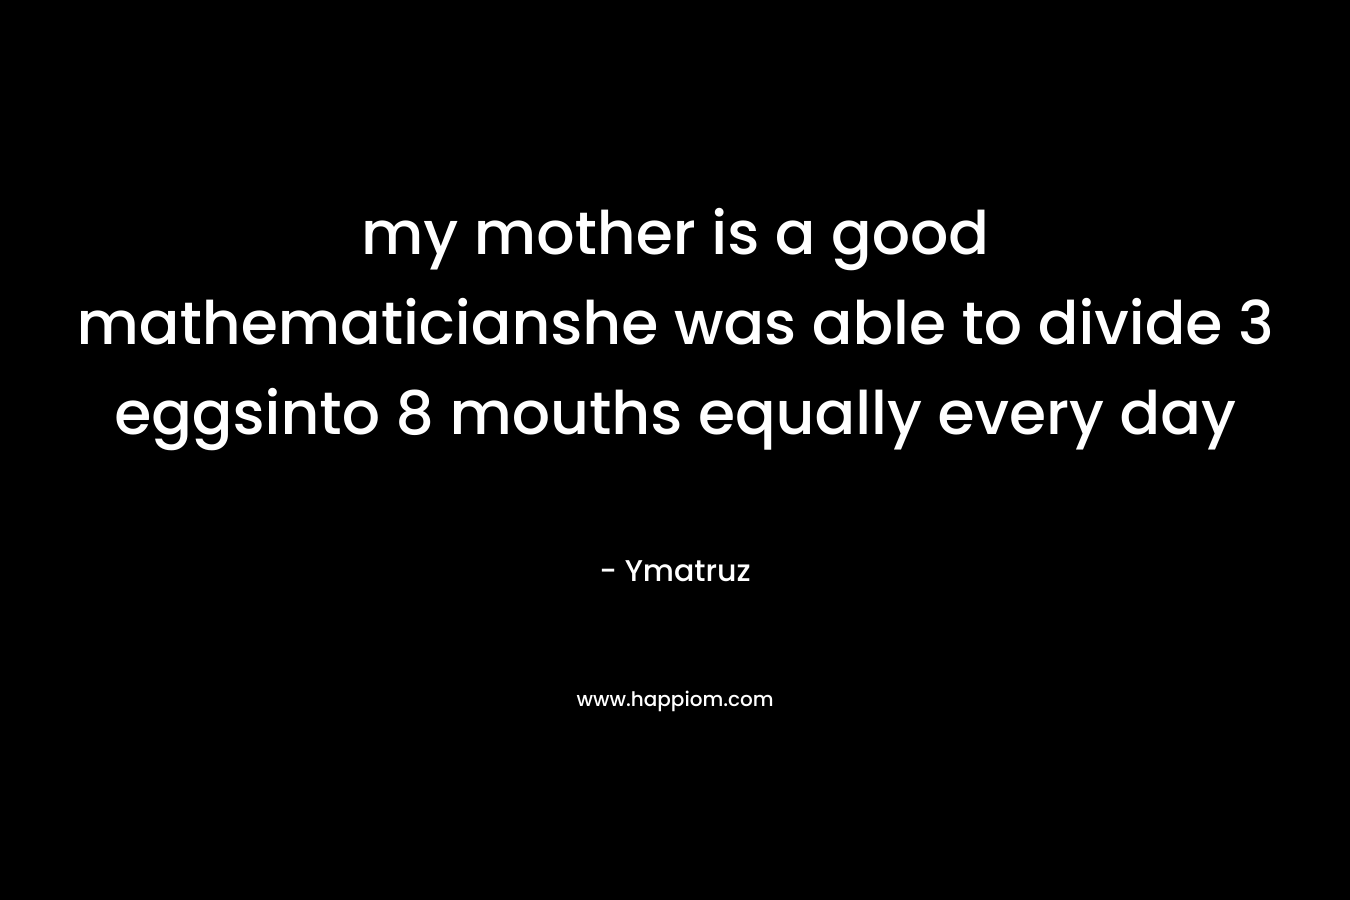 my mother is a good mathematicianshe was able to divide 3 eggsinto 8 mouths equally every day